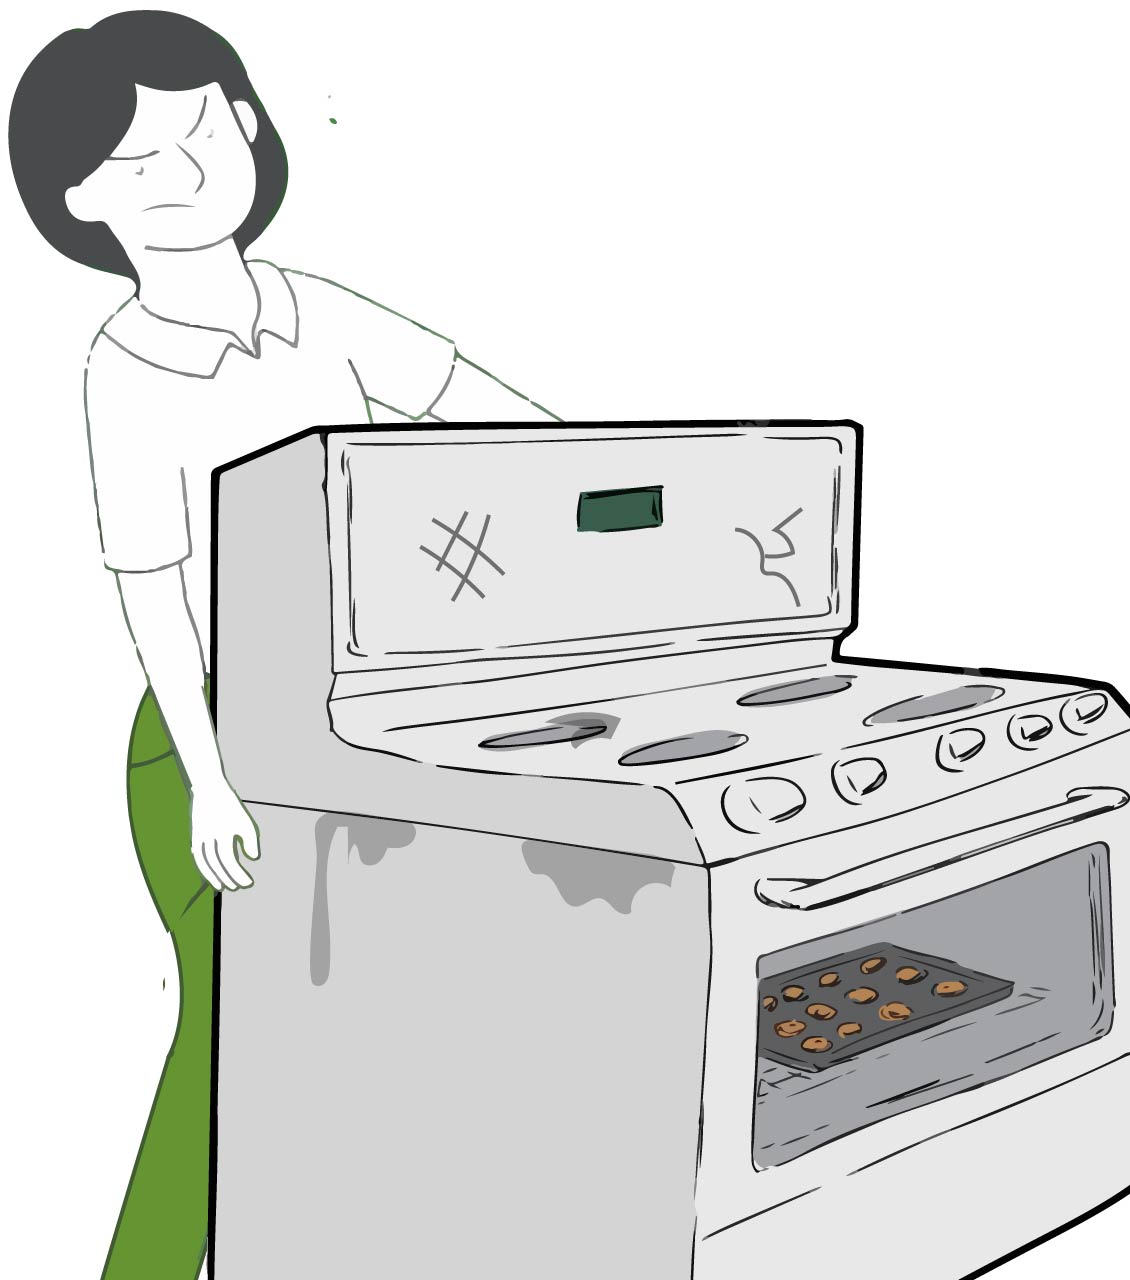 West Palm Beach oven removal services